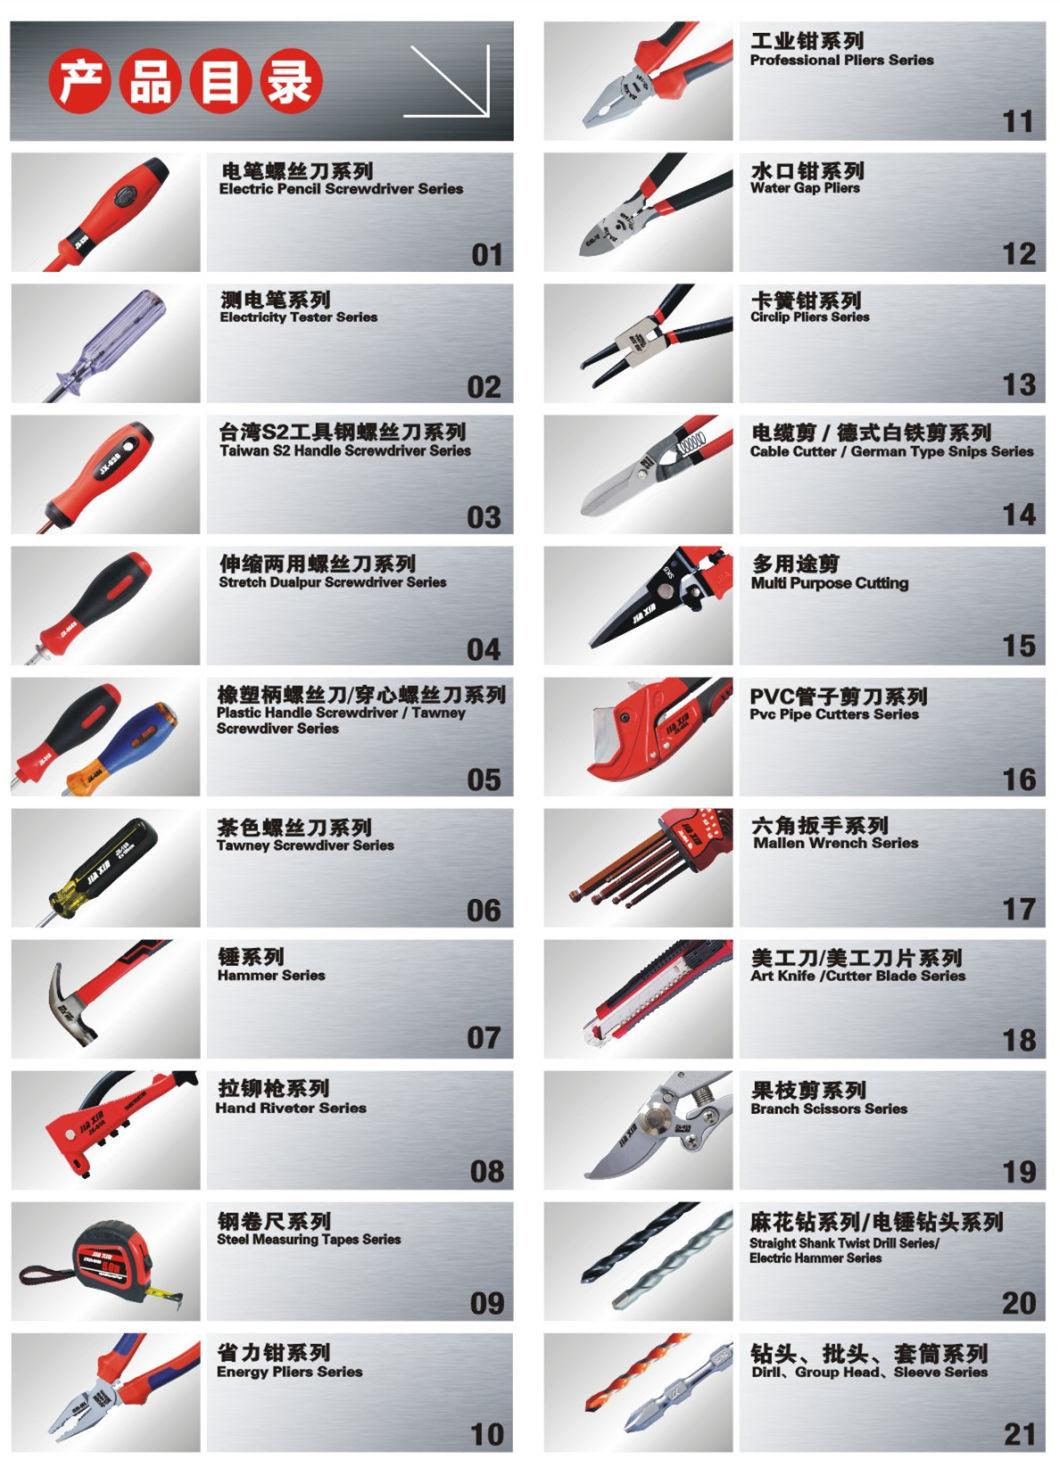 High Quality High Torque High Magnetic Two Section Screwdriver